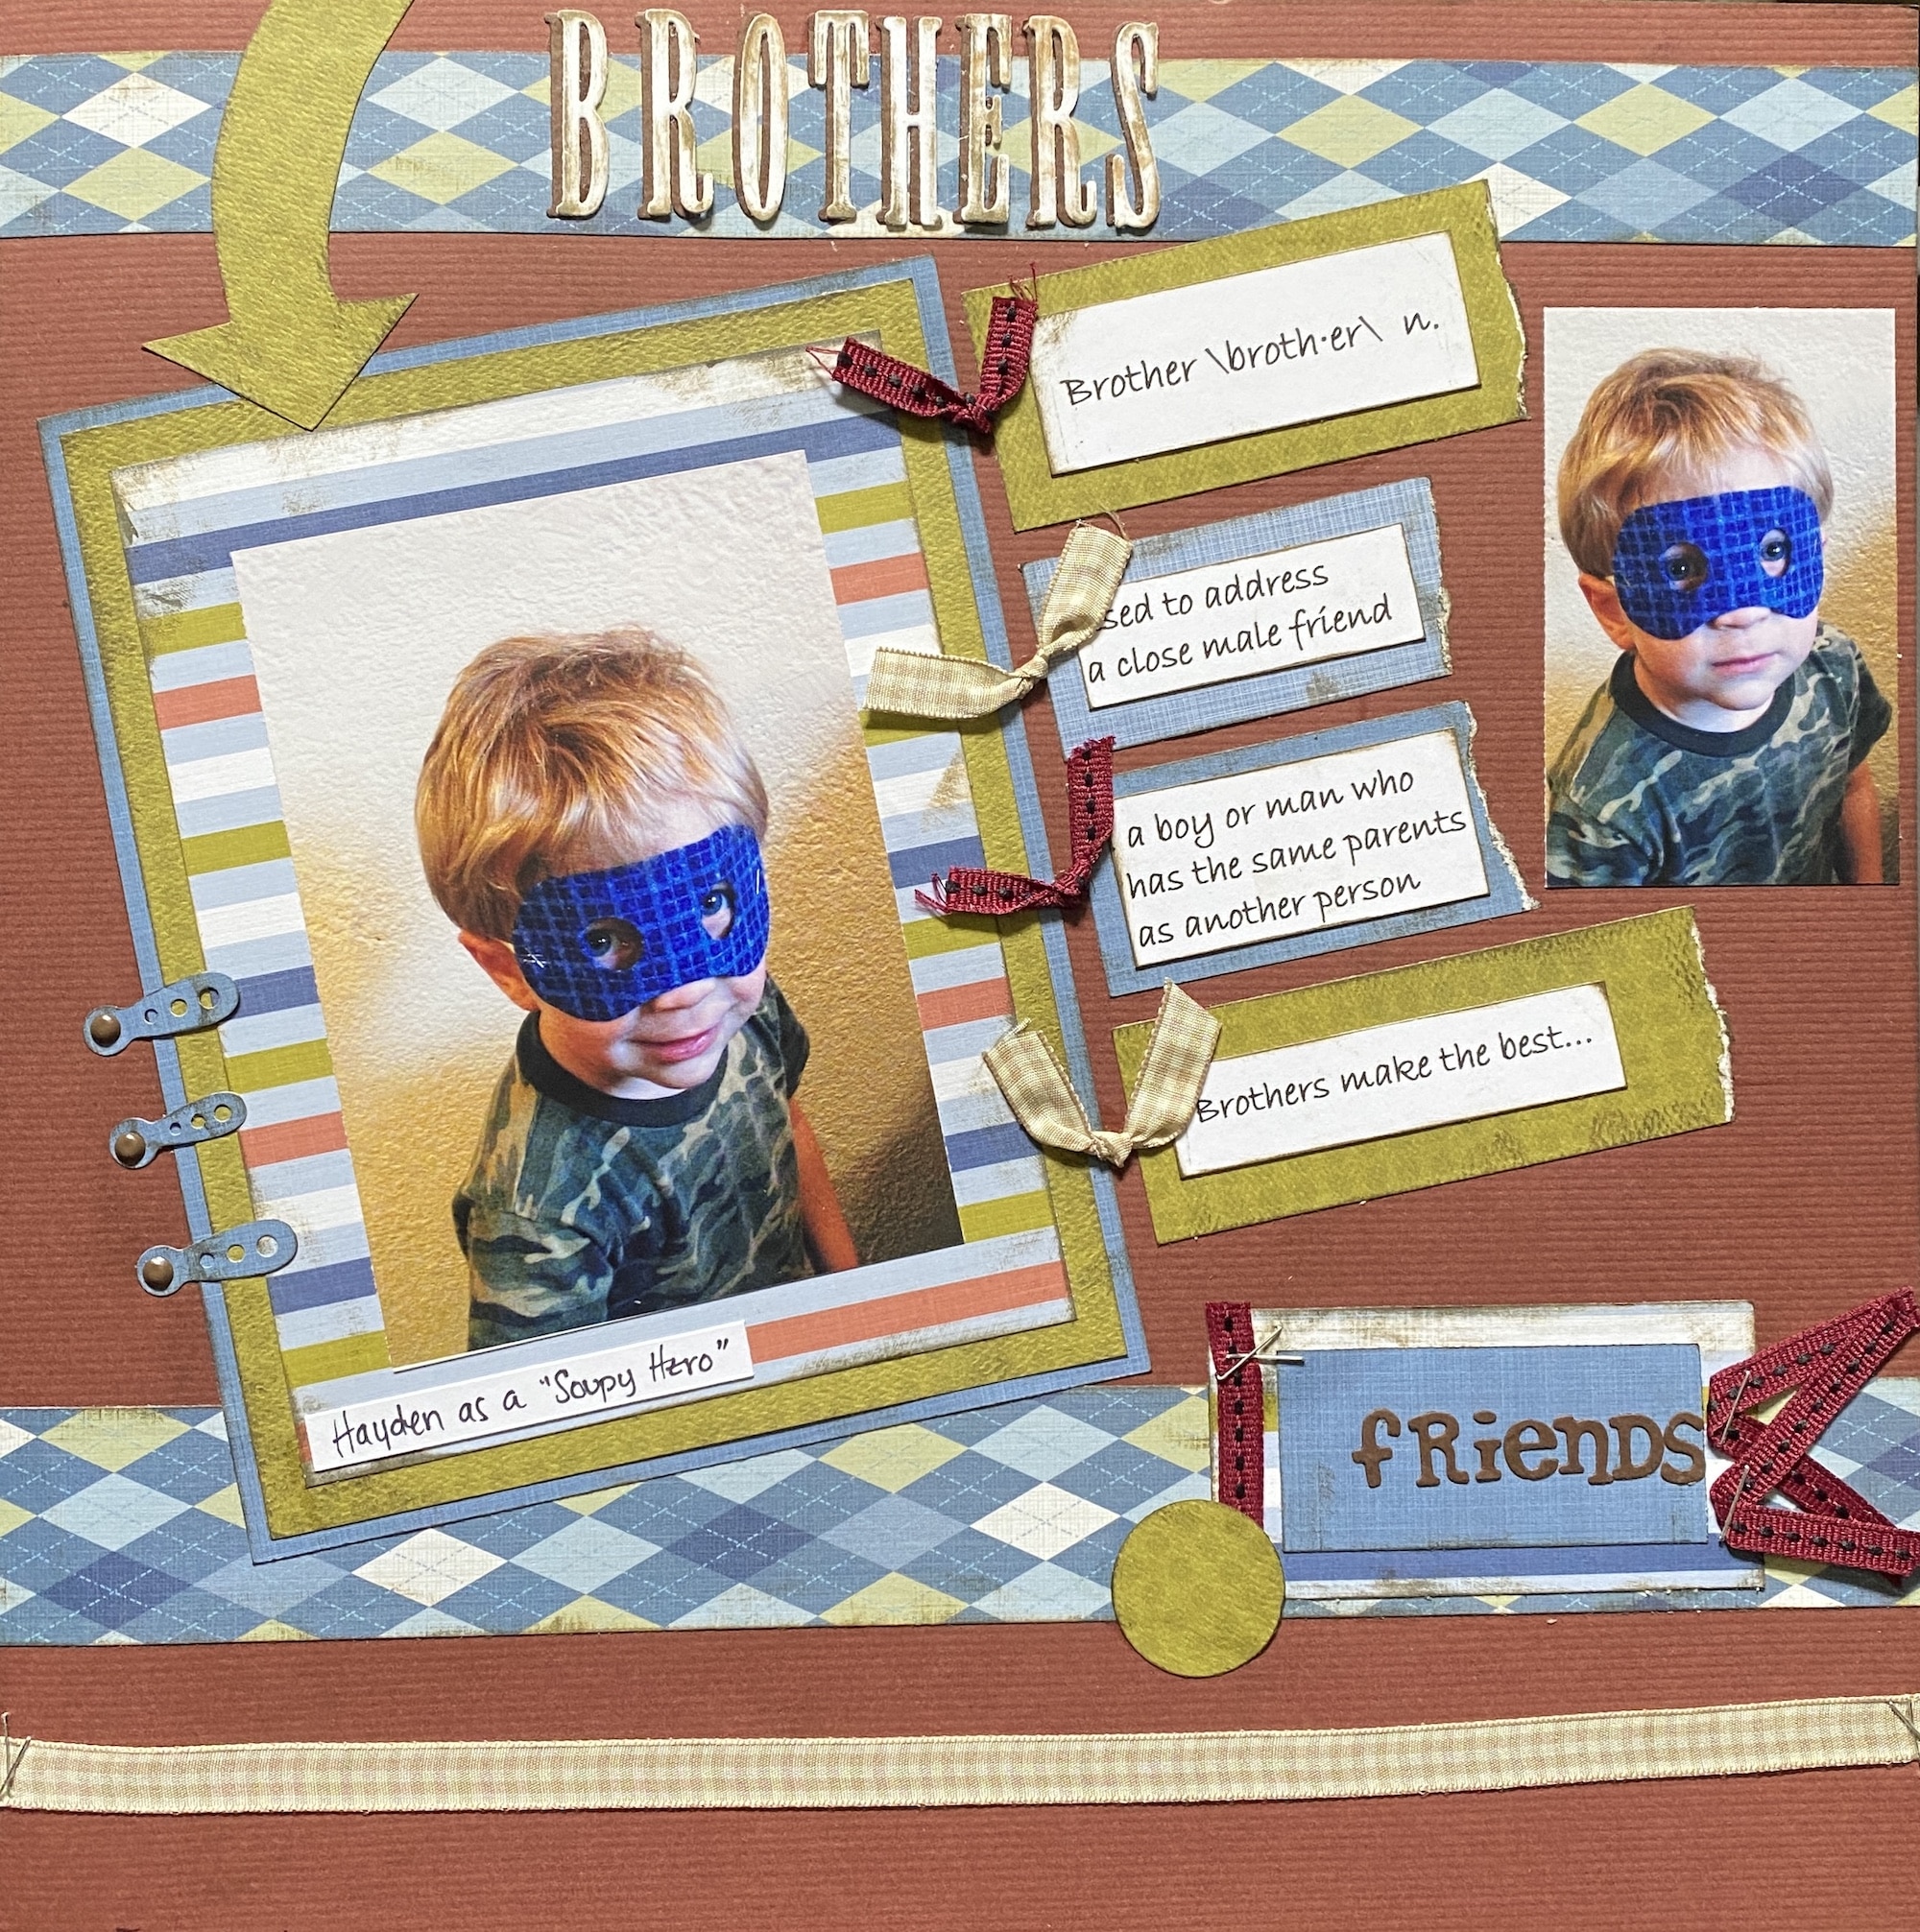 How to Scrapbook: Creating a Layout from Start to Finish